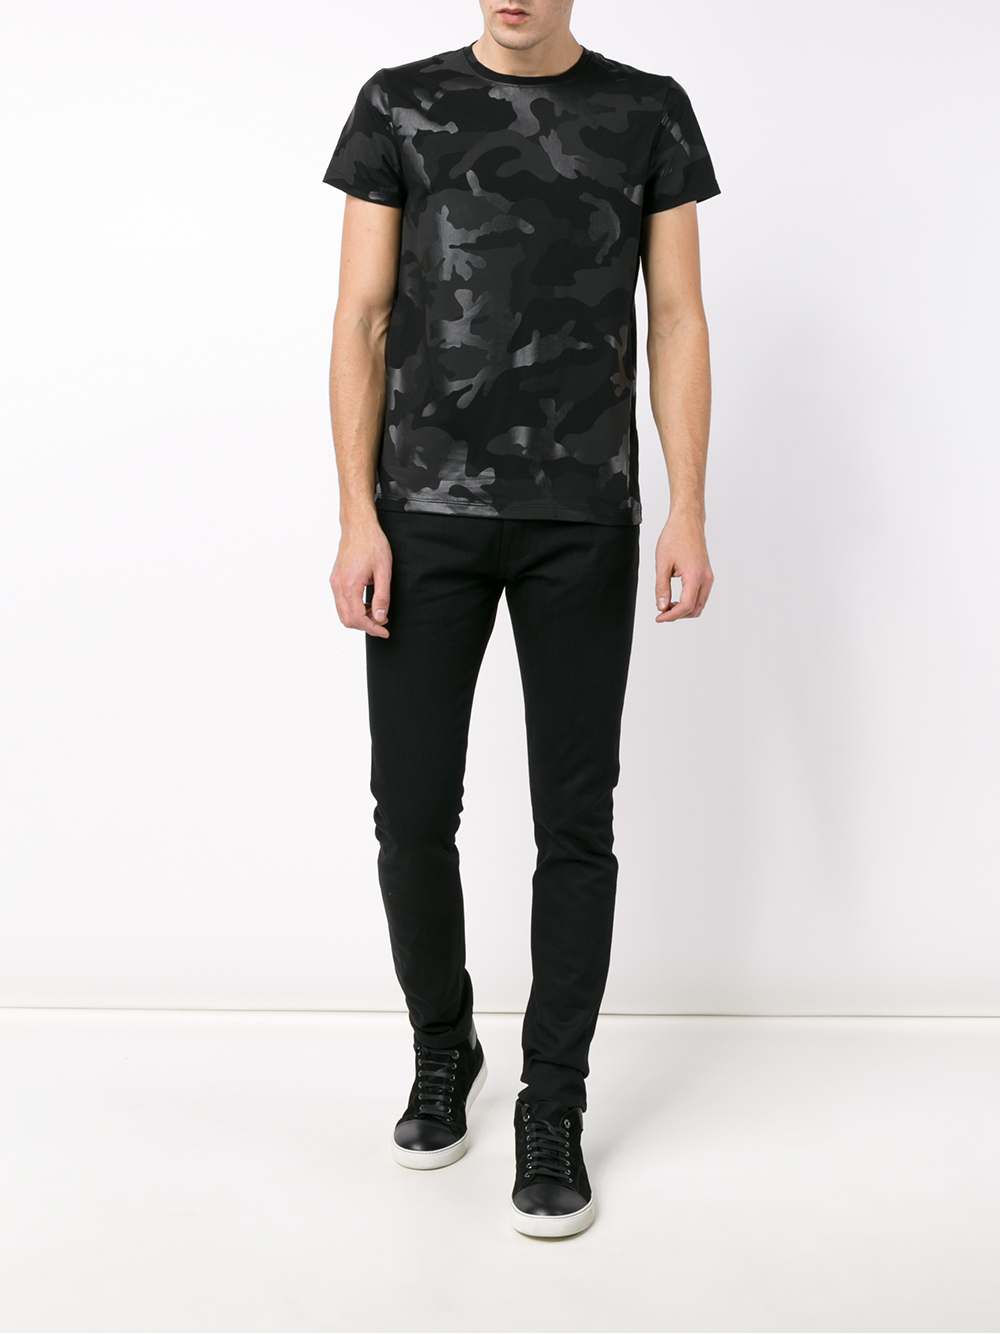 Valentino Camouflage T-shirt in Black for Men - Lyst